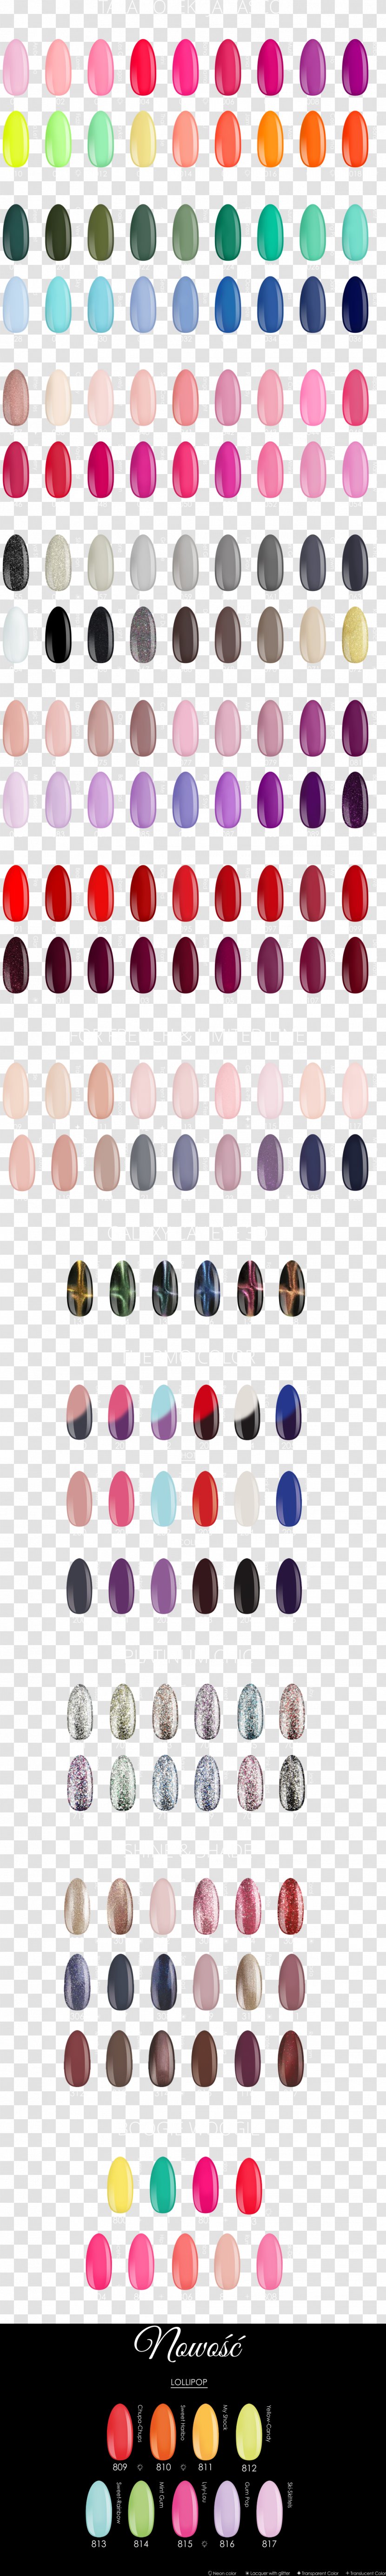 Gel Nails Manicure Lakier Hybrydowy Lacquer - Sales - Nail Transparent PNG